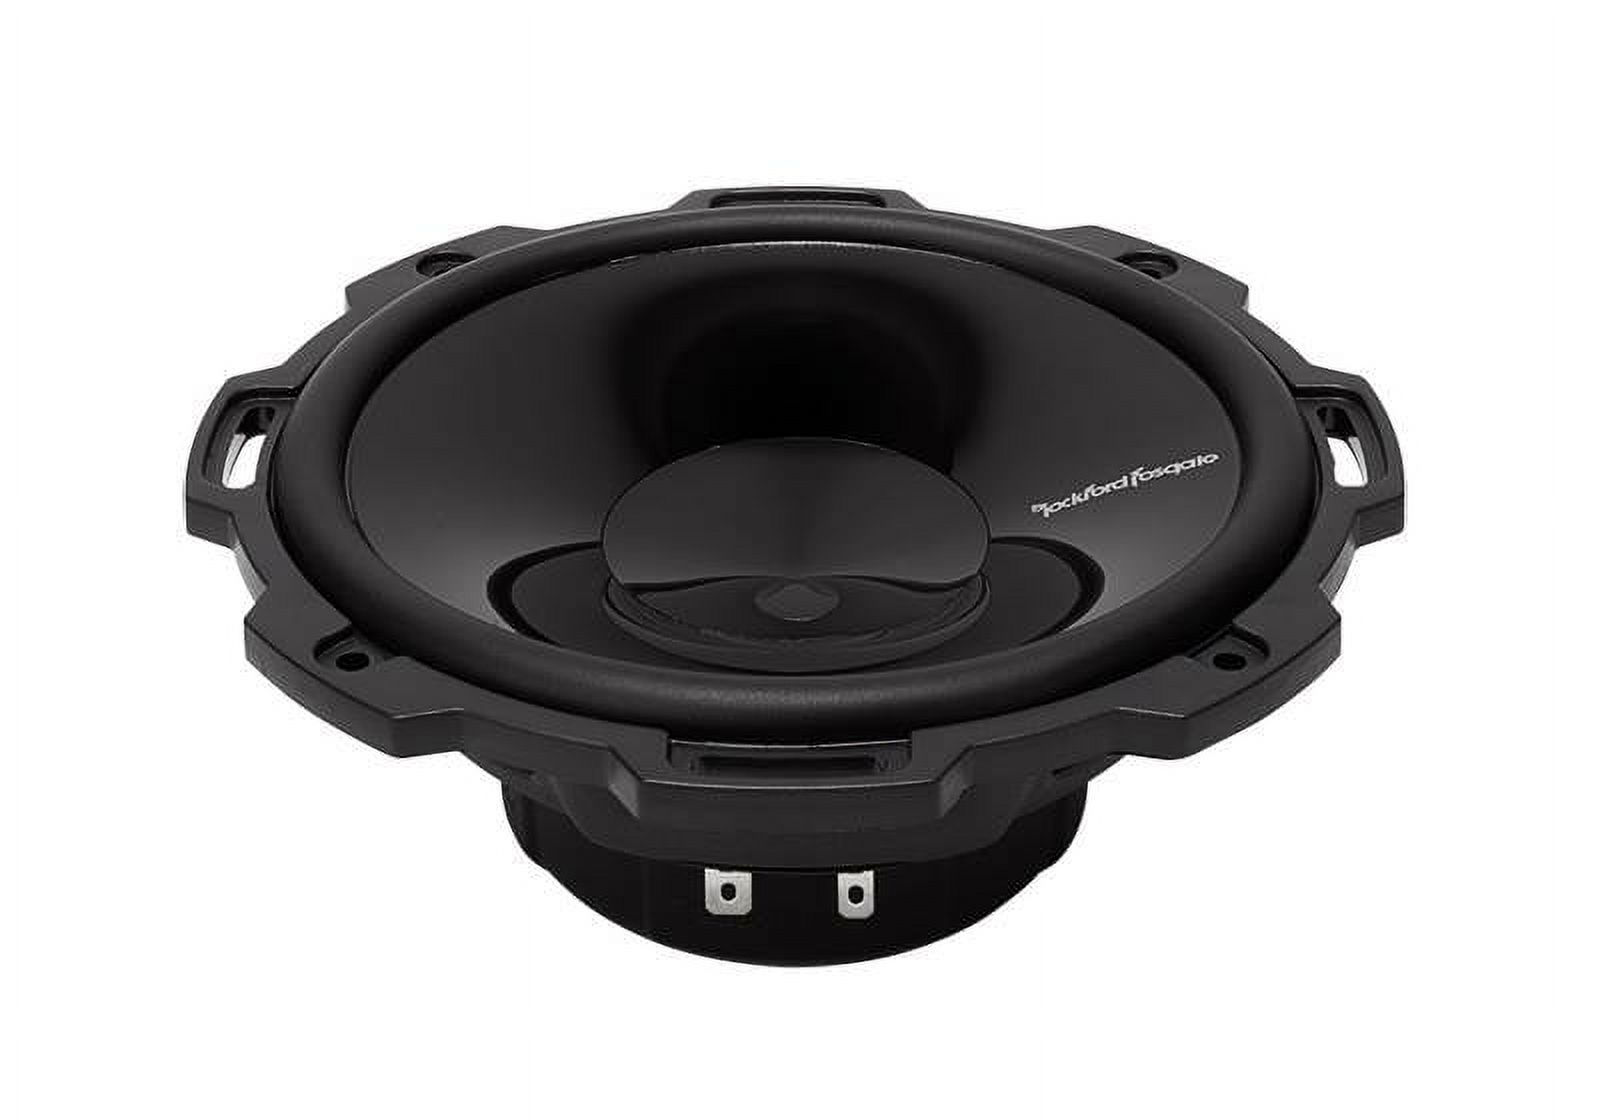 4) Rockford Fosgate P1675-S 6.75" 240W 2-Way Car Audio Component Speakers System - image 5 of 11